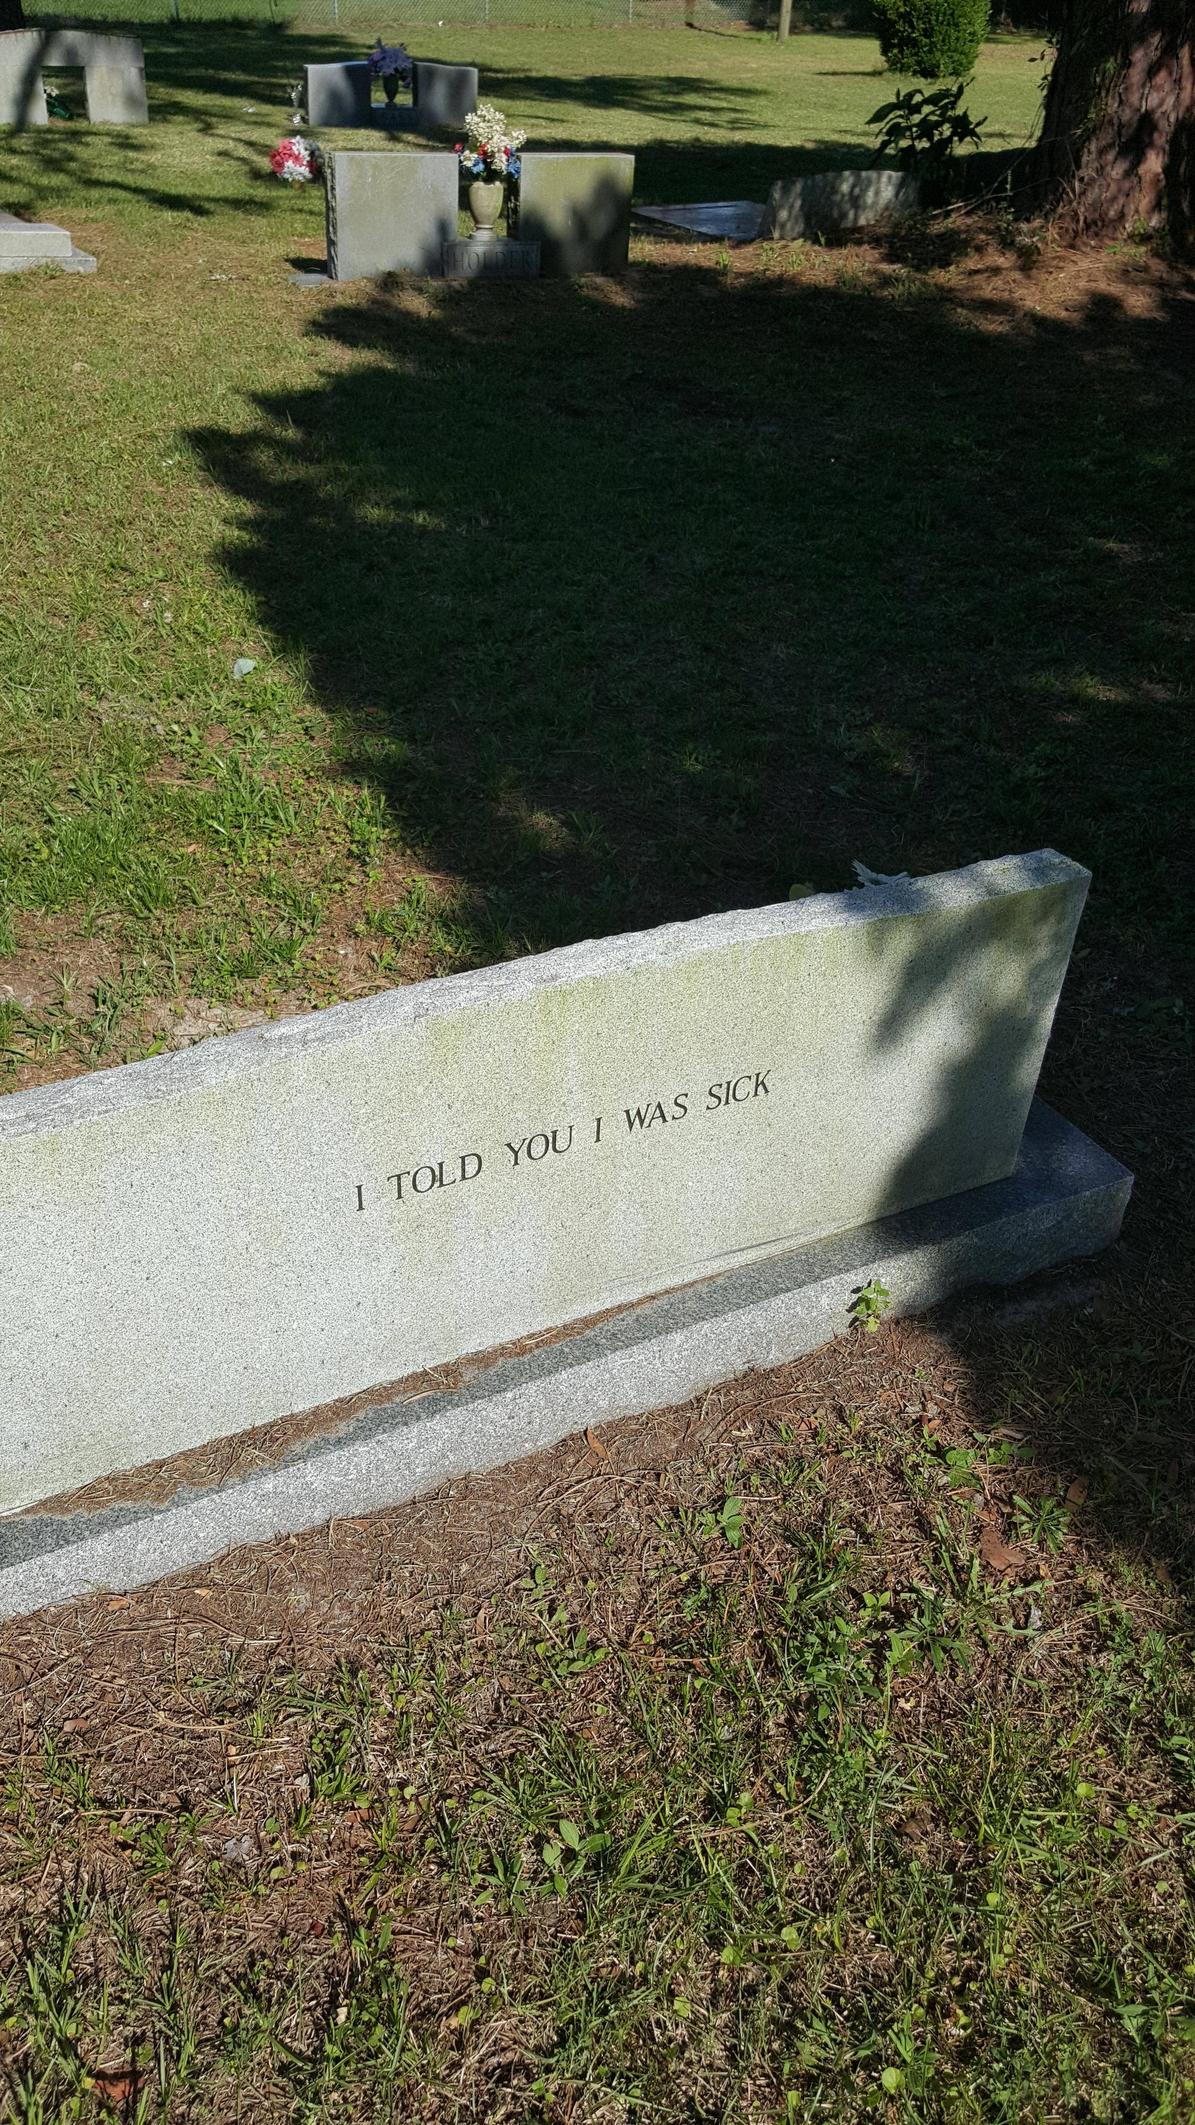 Found this at a local cemetery.